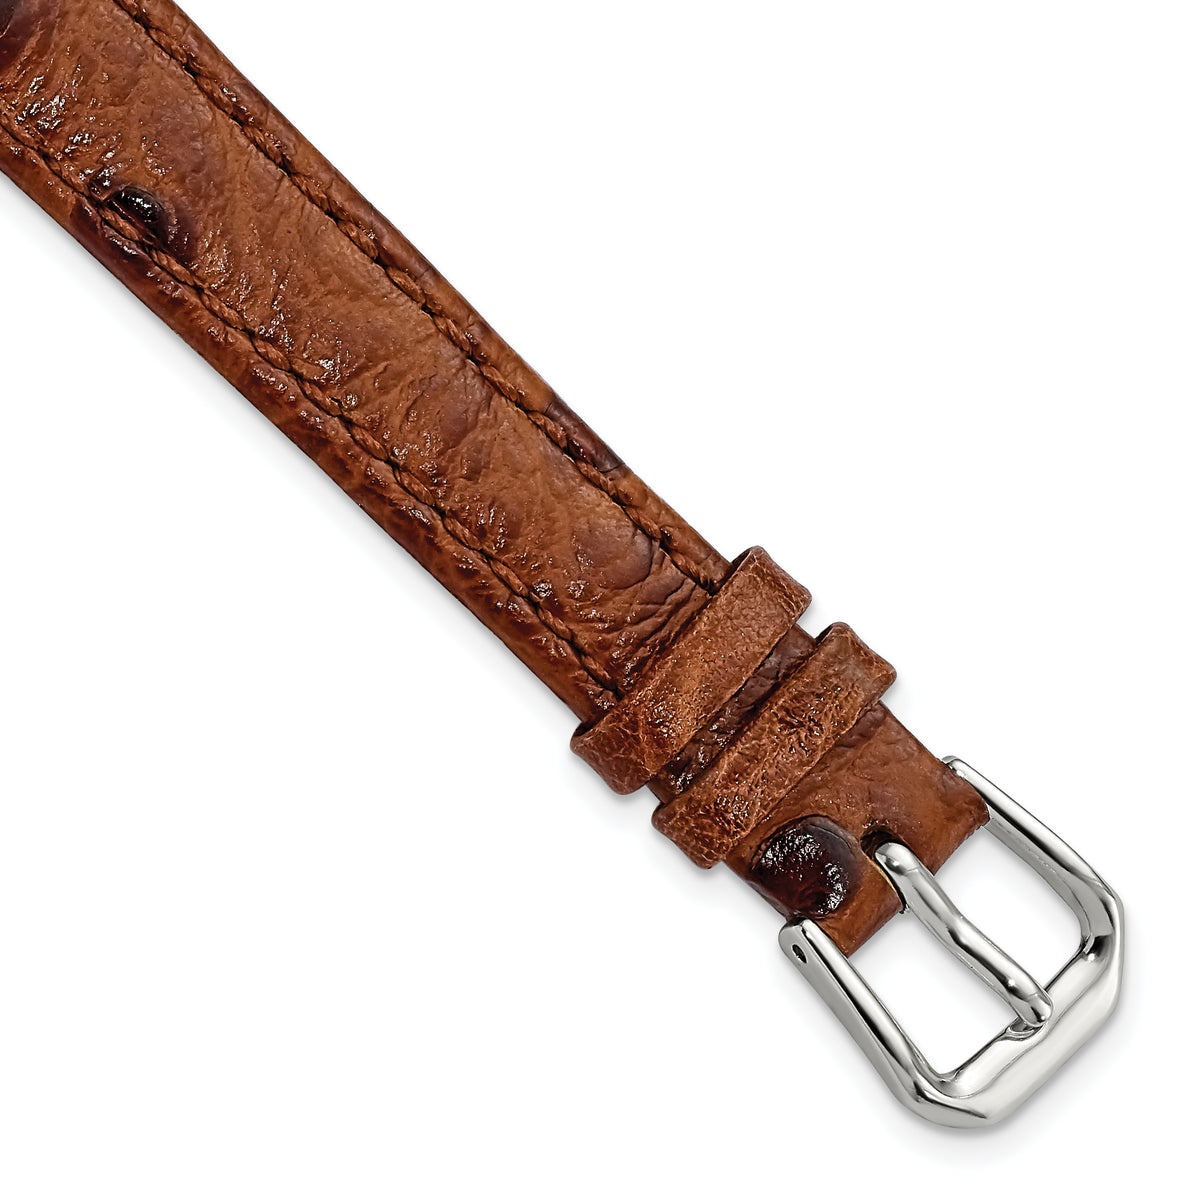 DeBeer 12mm Havana Ostrich Grain Leather with Silver-tone Buckle 6.75 inch Watch Band